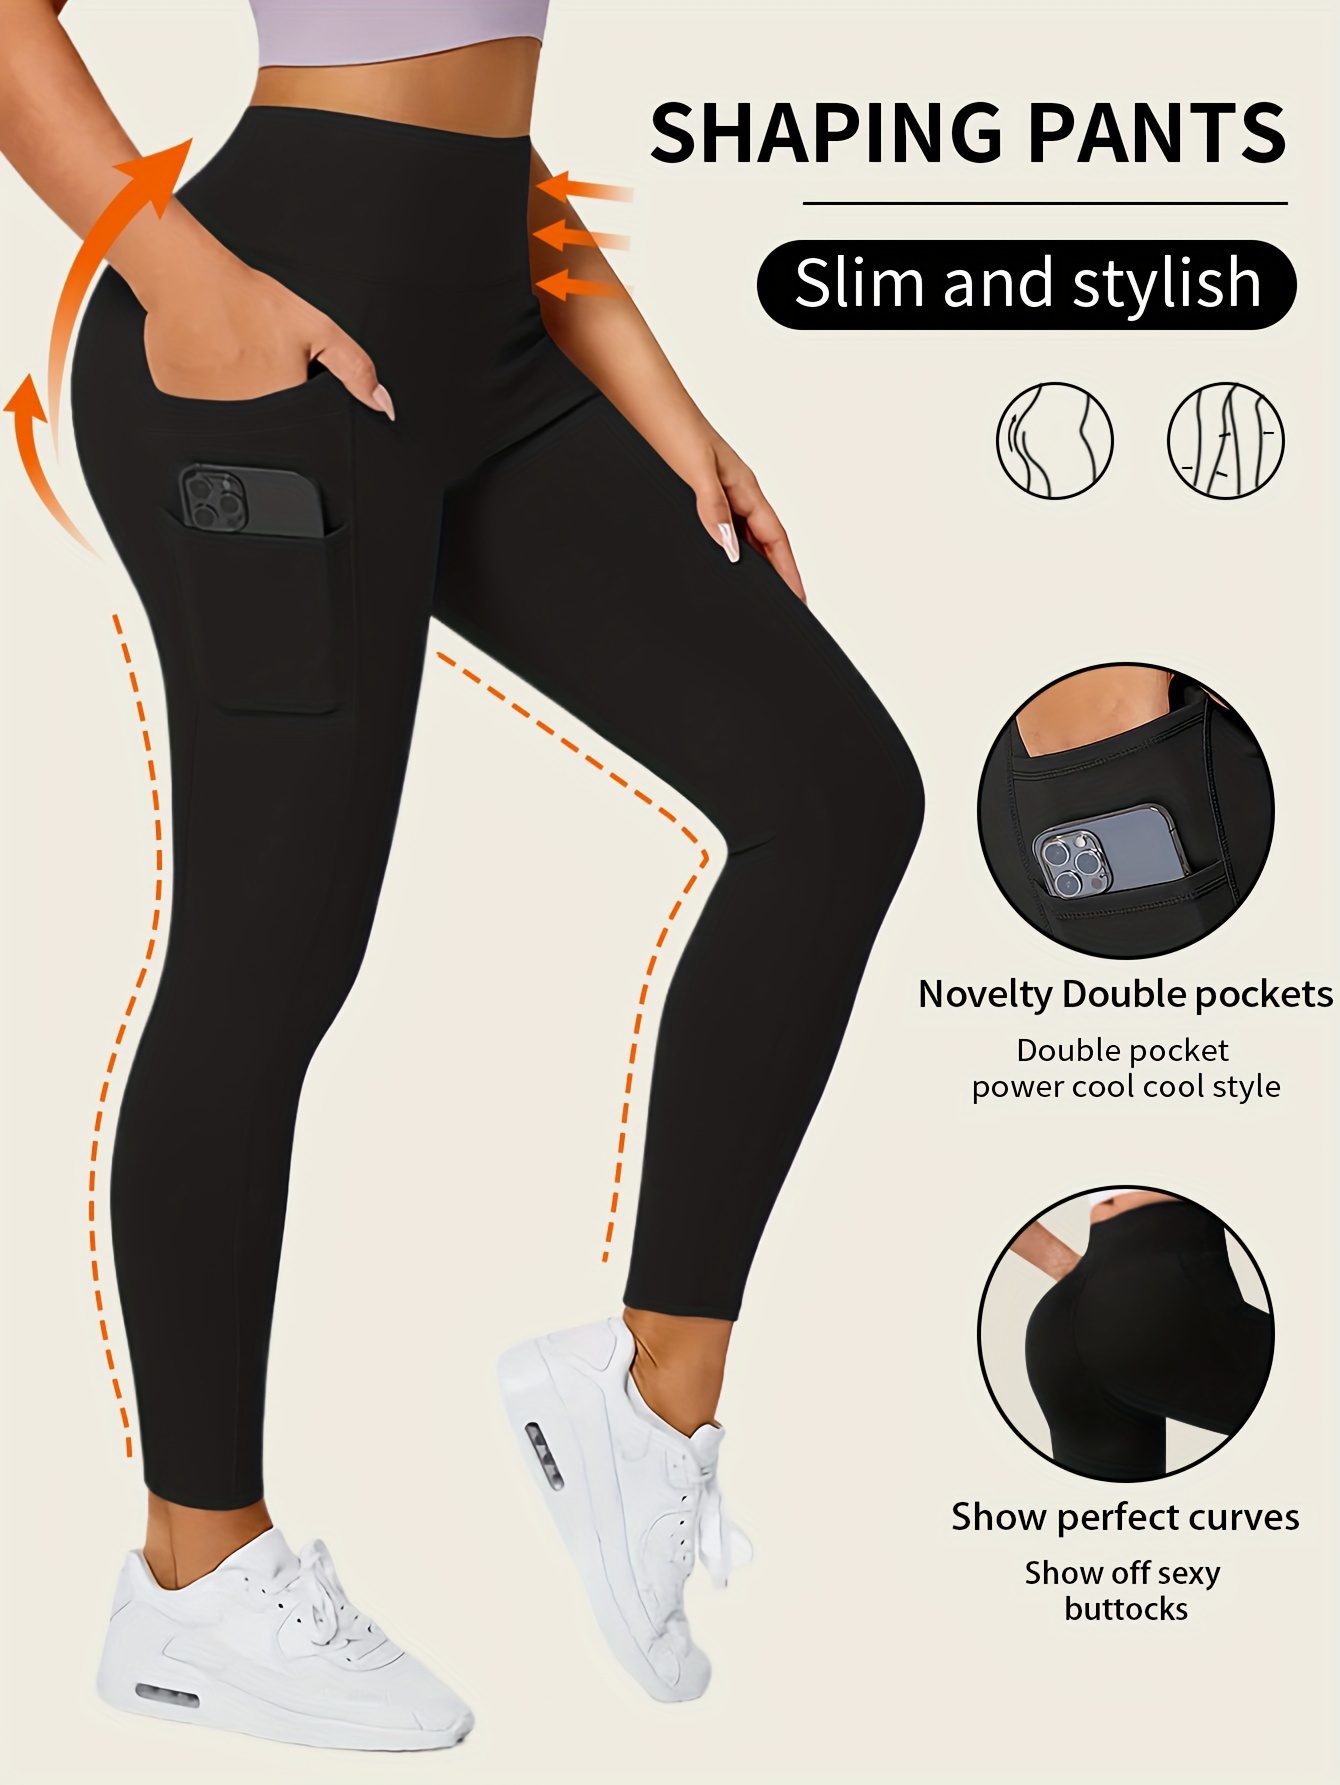  Womens Blue Flame Leggings Tummy Control Yoga Pants High Waist  Workout Butt Lift Tights Slimming Leggings : Clothing, Shoes & Jewelry